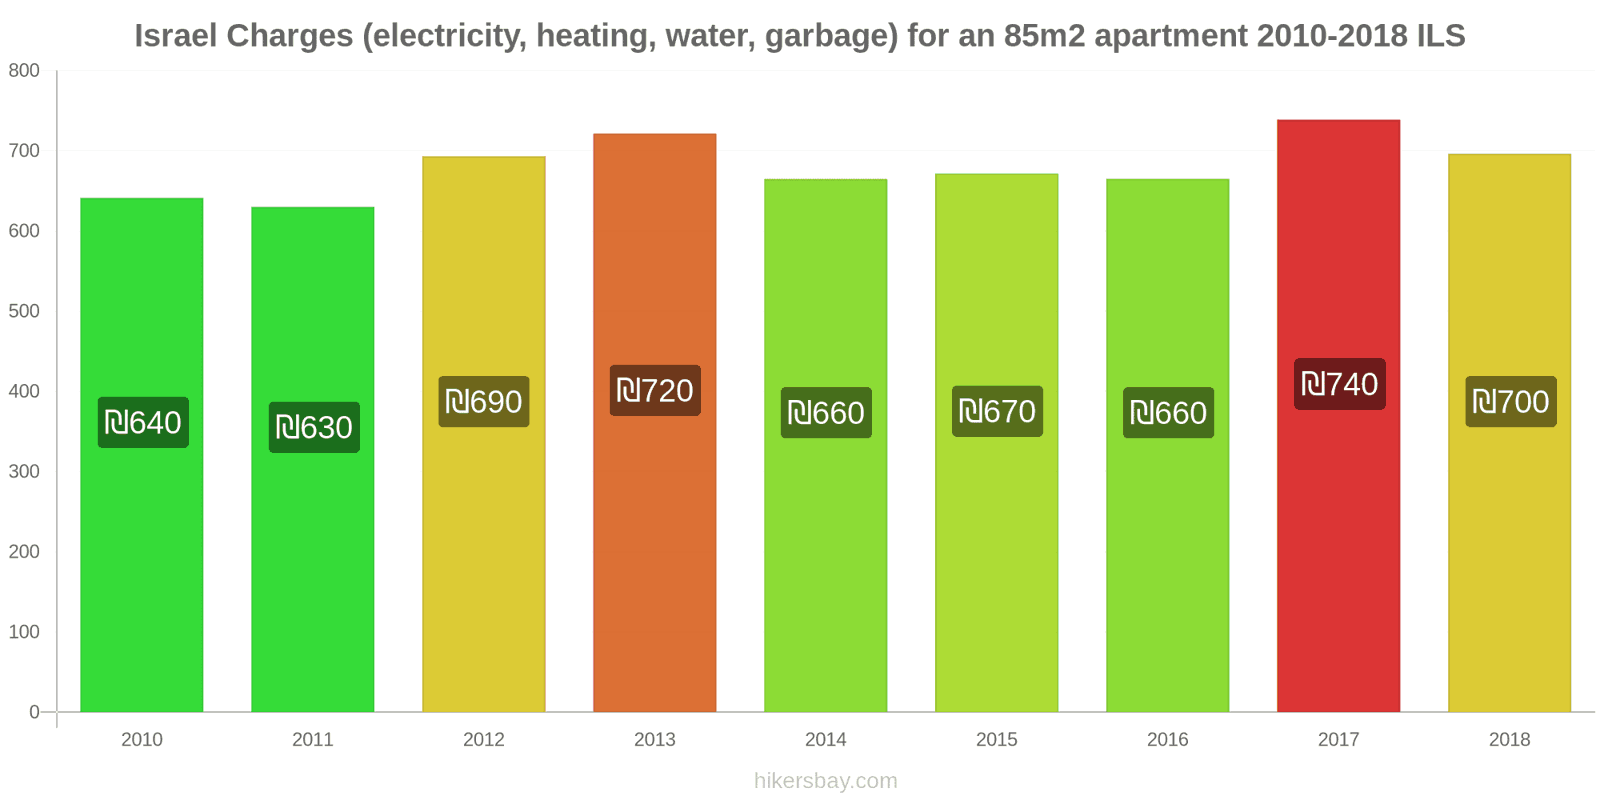 Israel price changes Utilities (electricity, heating, water, garbage) for an 85m2 apartment hikersbay.com